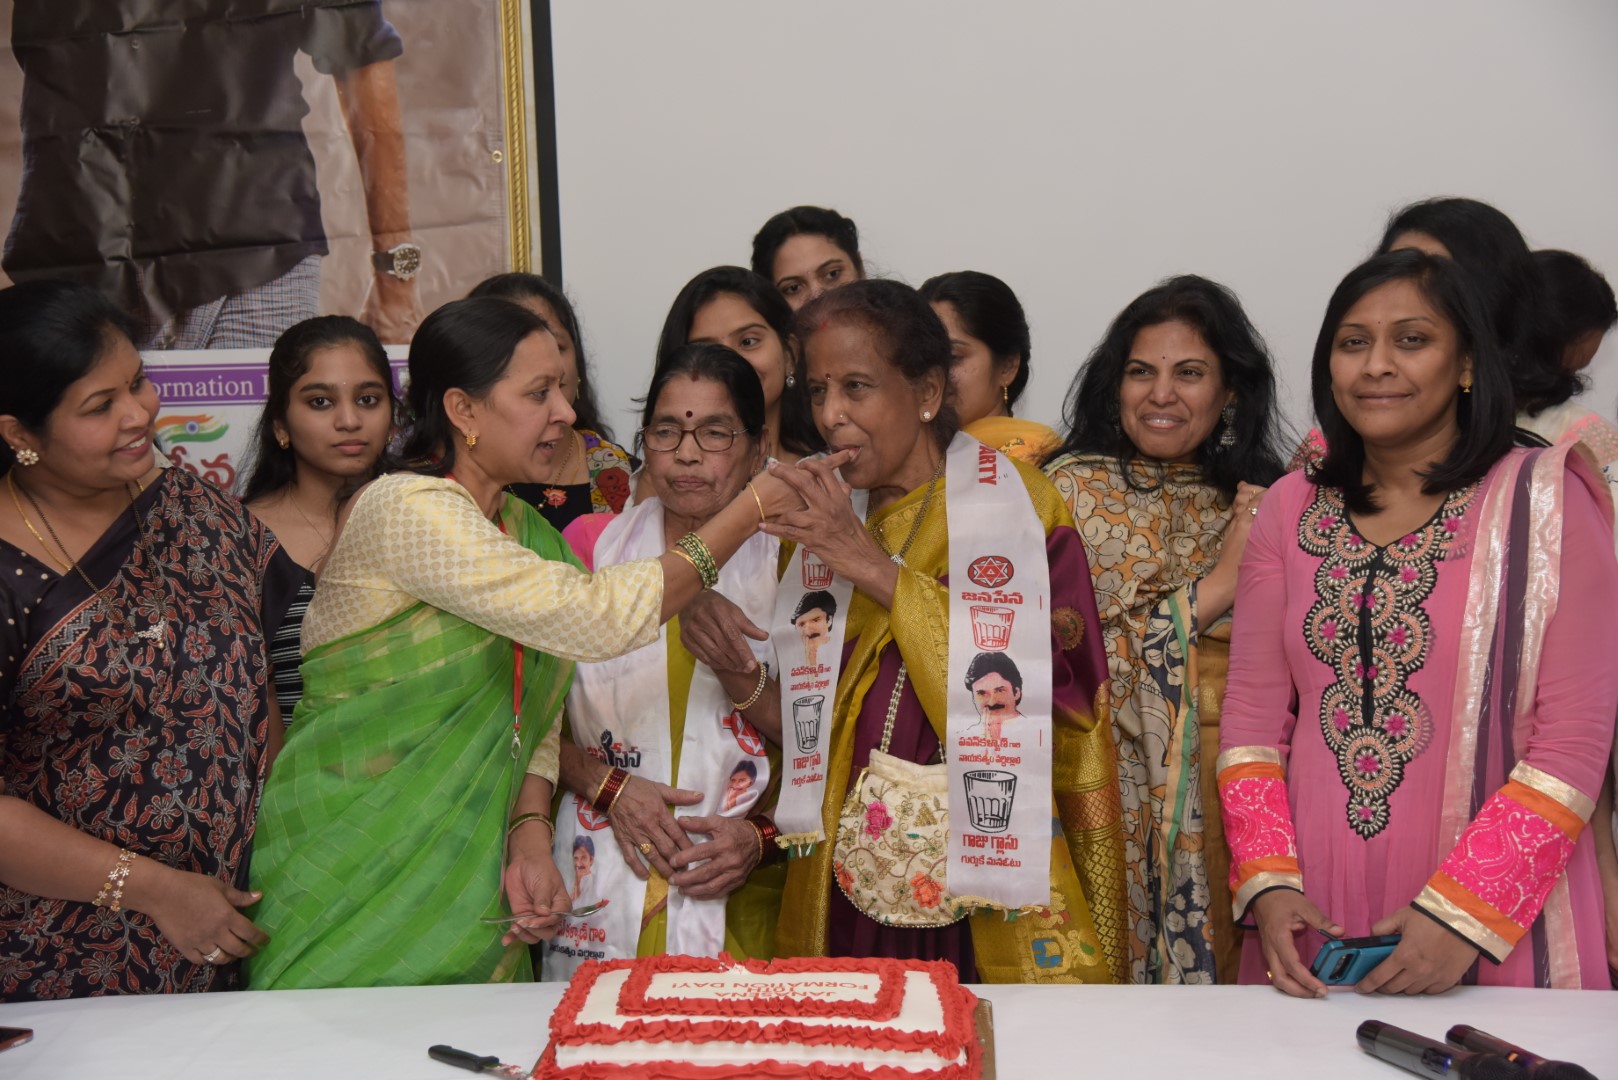 Janasena 10th Formation day in Edison New Jersey Photos ( Photos by Dr. Shiva Kumar Anand )